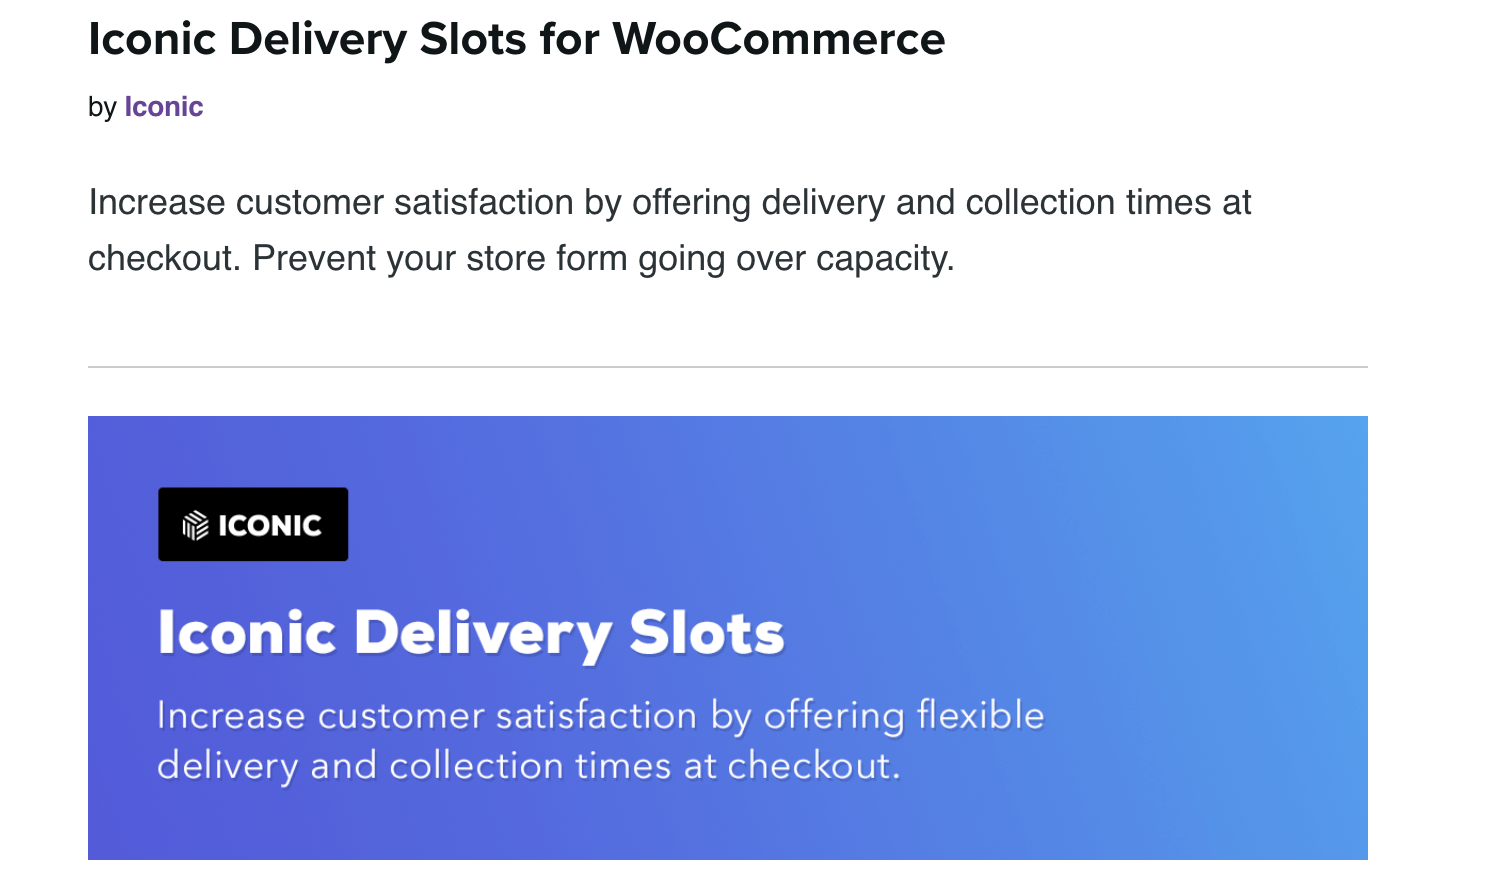 To get started, purchase WooCommerce Delivery Slots.